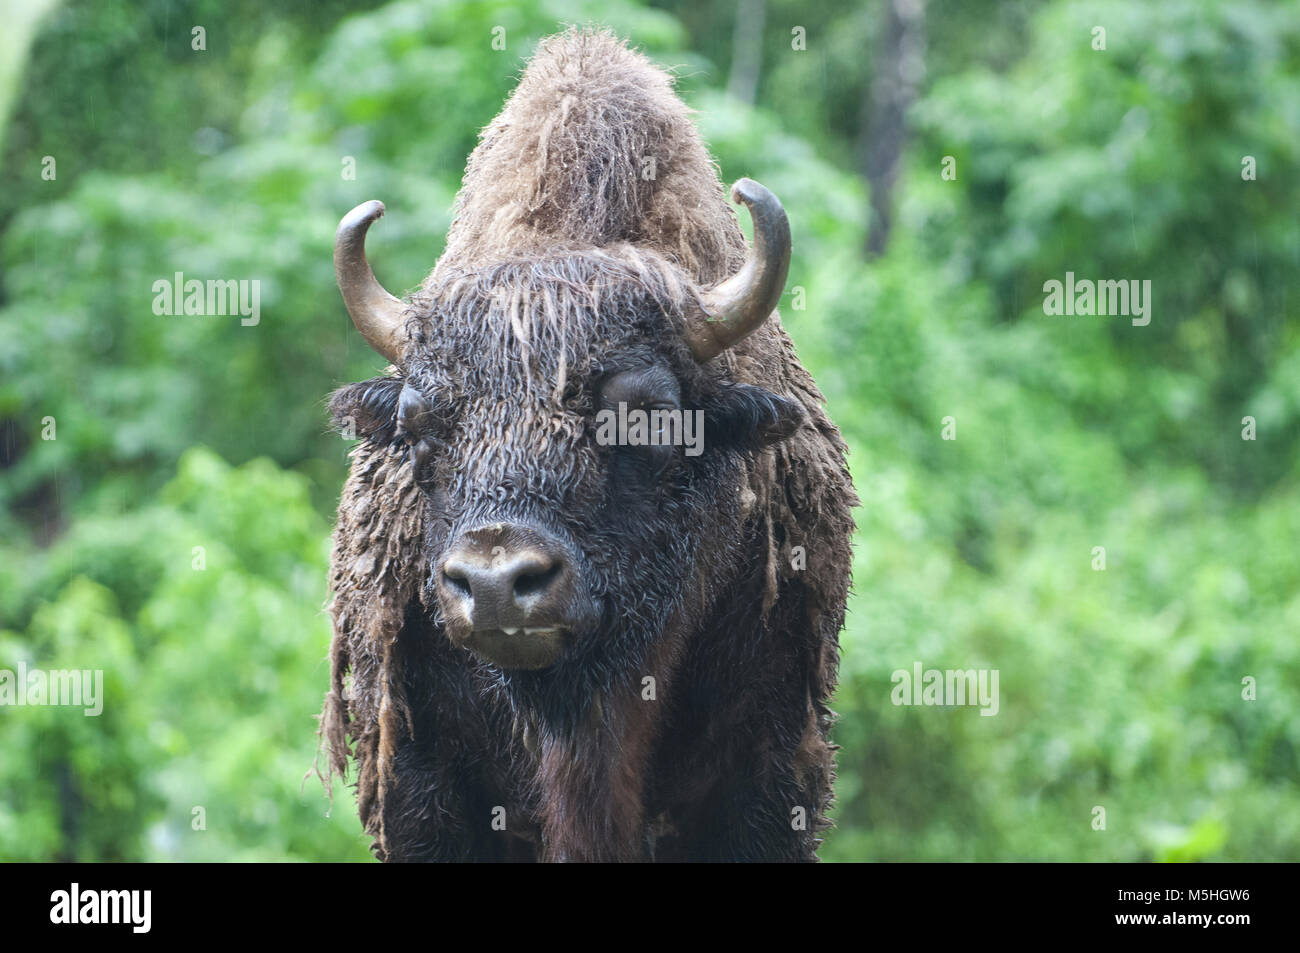 Beautiful Isolated Photo Of A Wild Bison, Cattle In The Forest Stock Photo